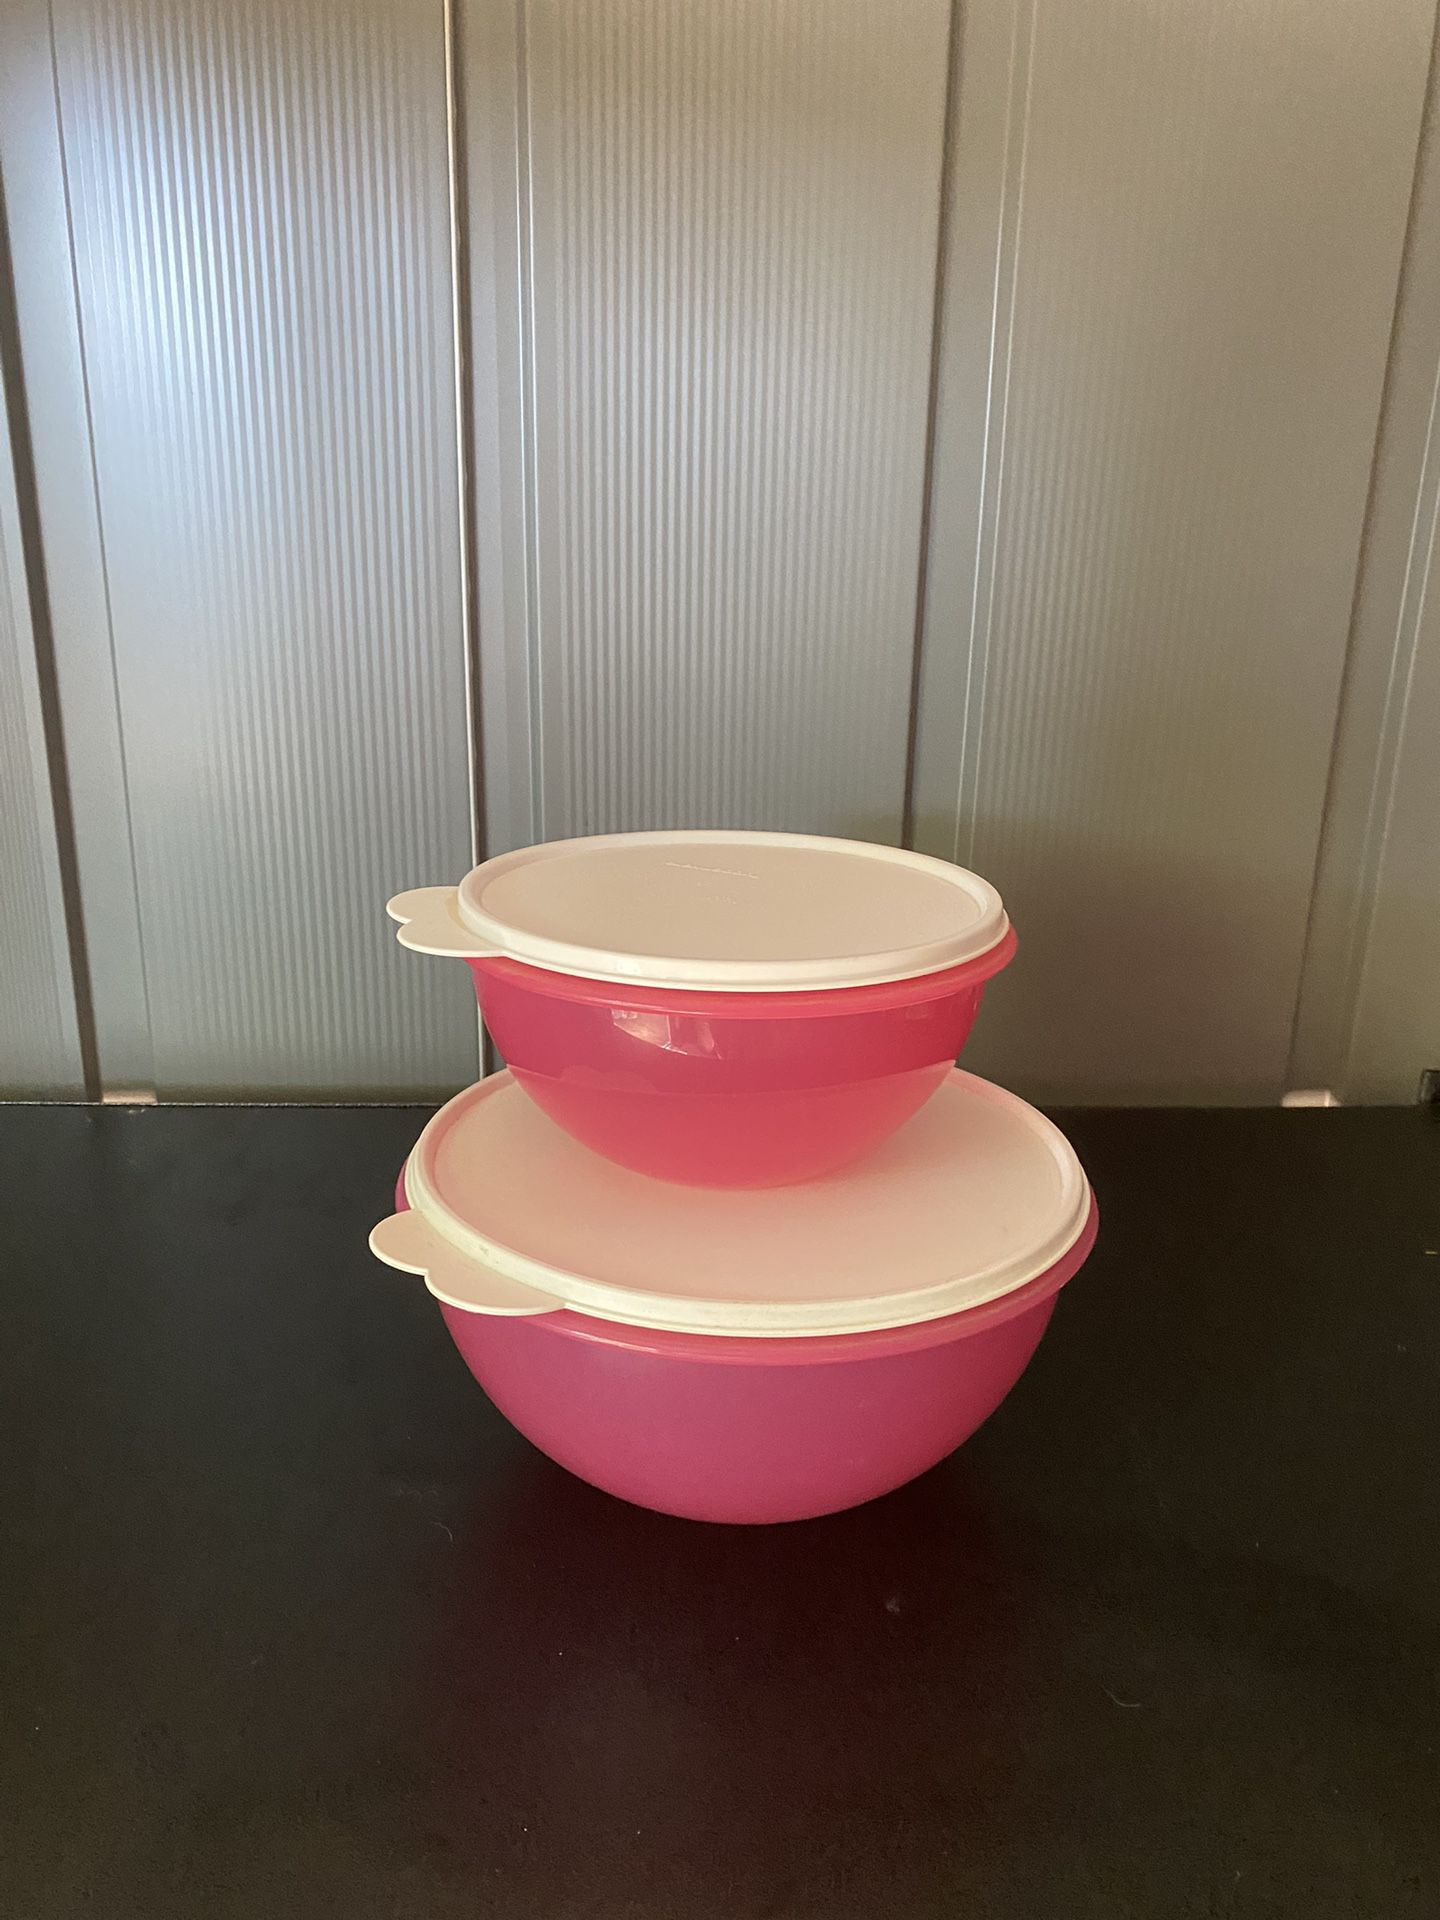 Best New Tupperware Mixing Bowl Set for sale in St. Joseph, Missouri for  2023